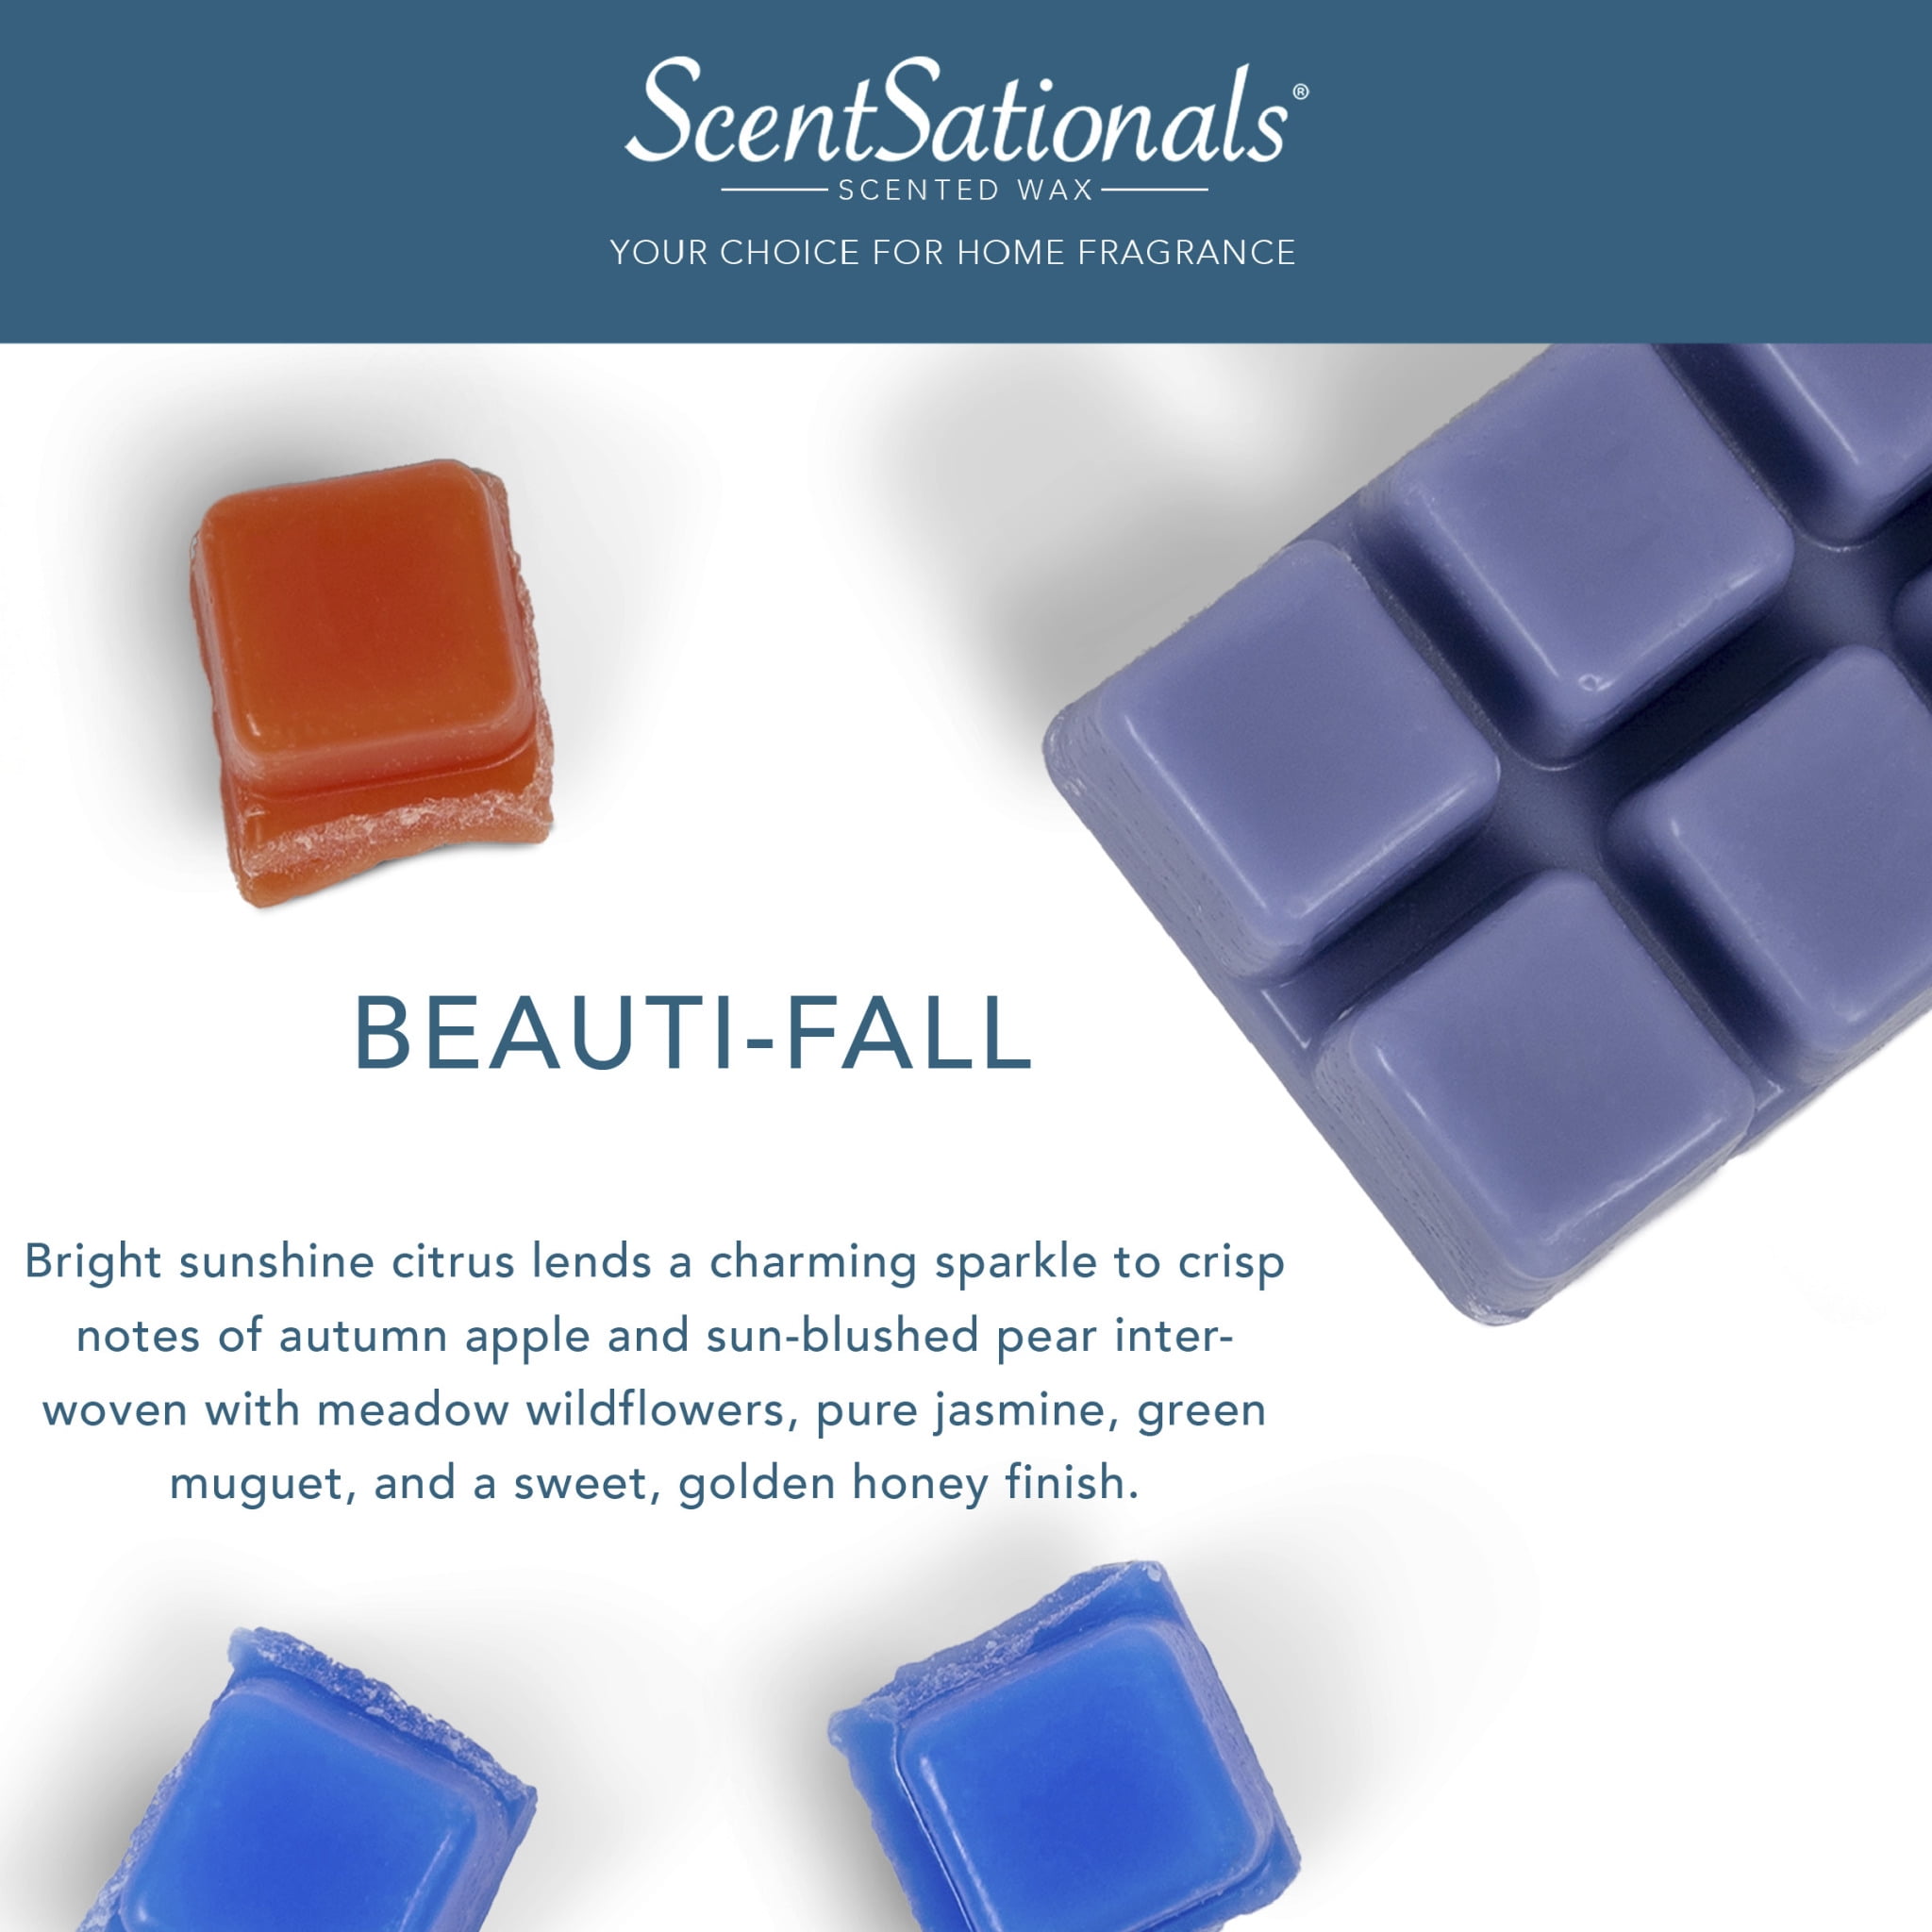 His and Hers Wax Melt - Soybean Wax Melts - Blaque Beauti Scentz